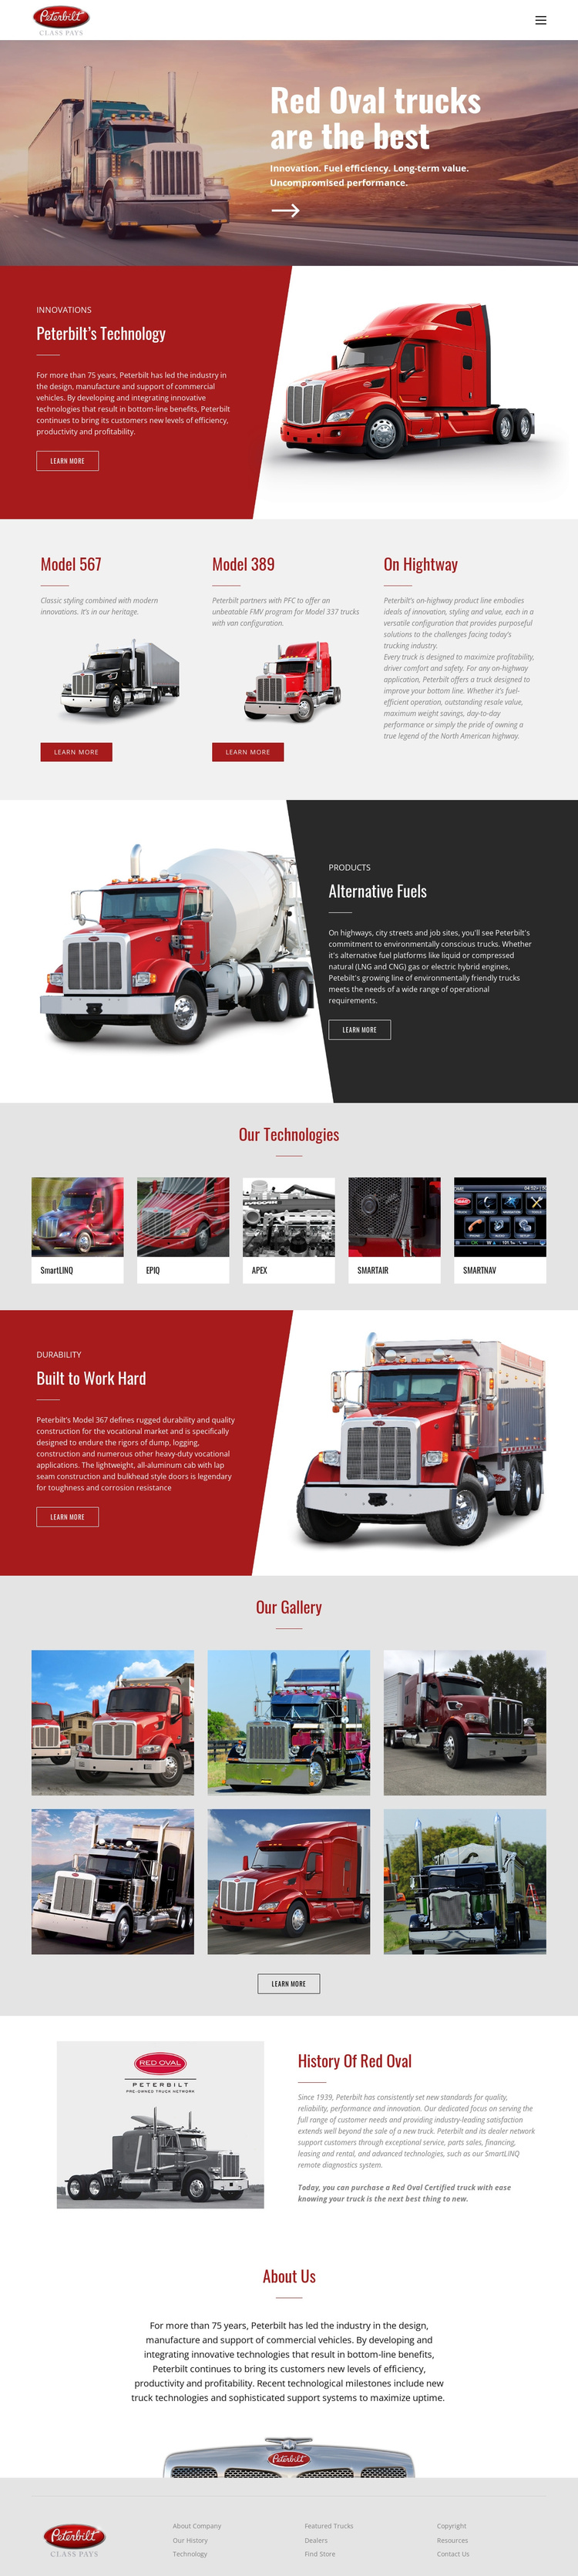 Red oval truck transportaion Joomla Template